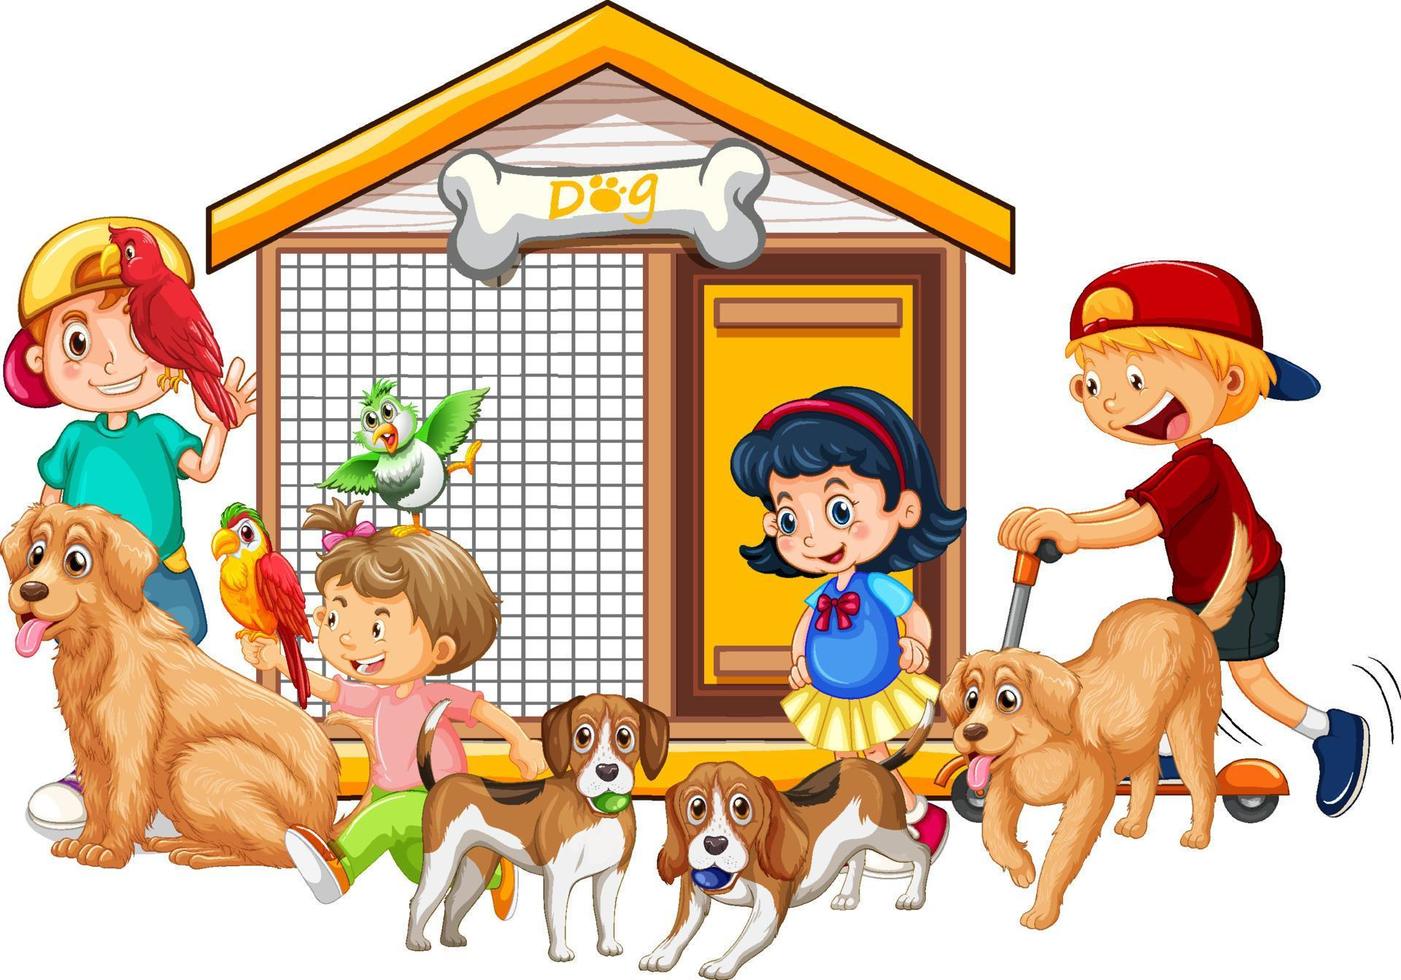 Children with their dogs and birds on white background vector